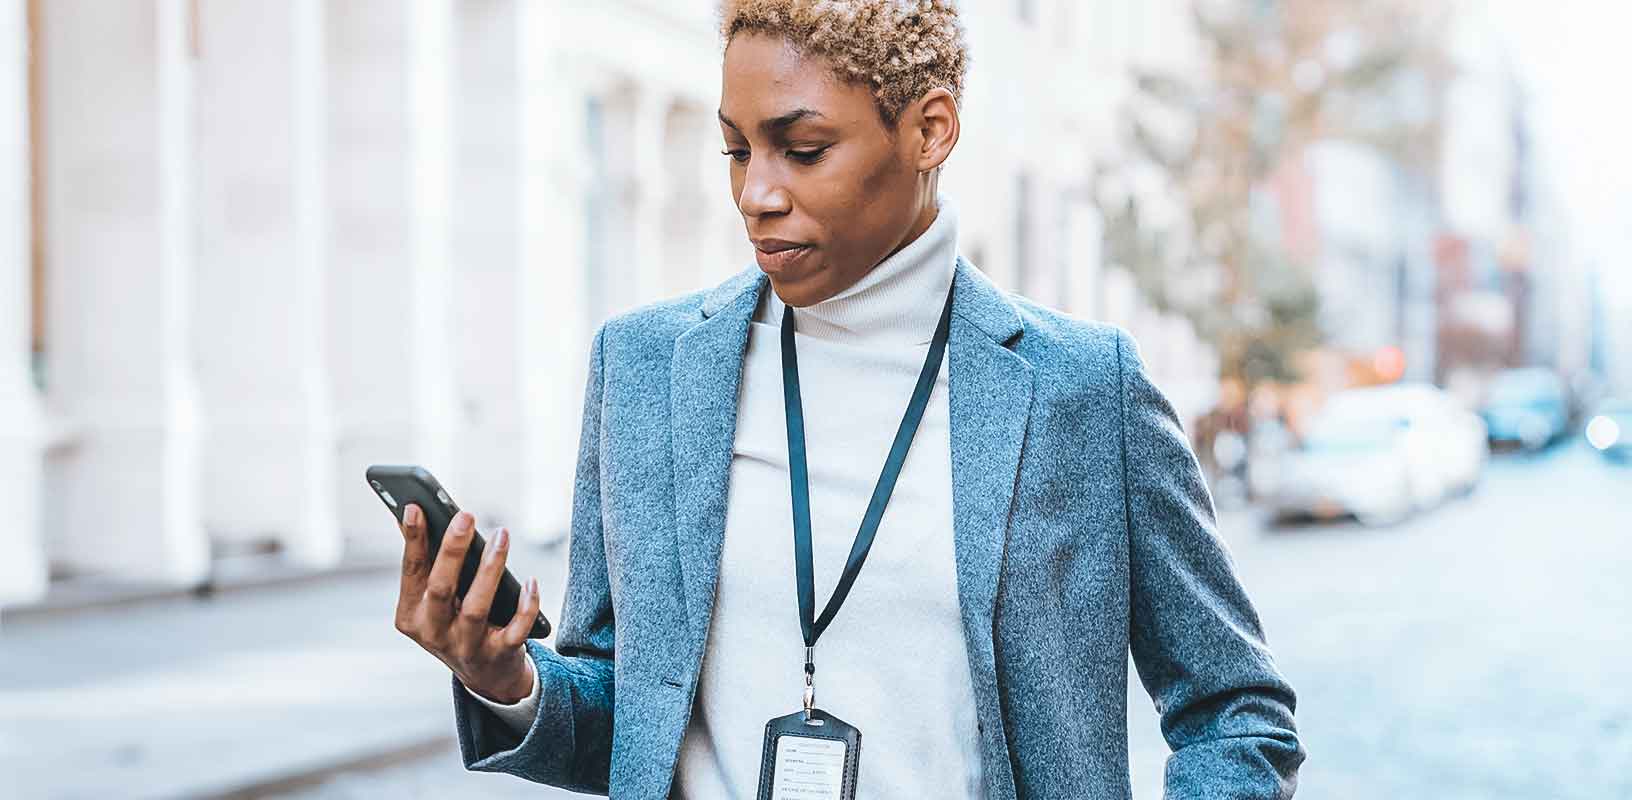 Woman reporting a security or safety problem from her mobile phone